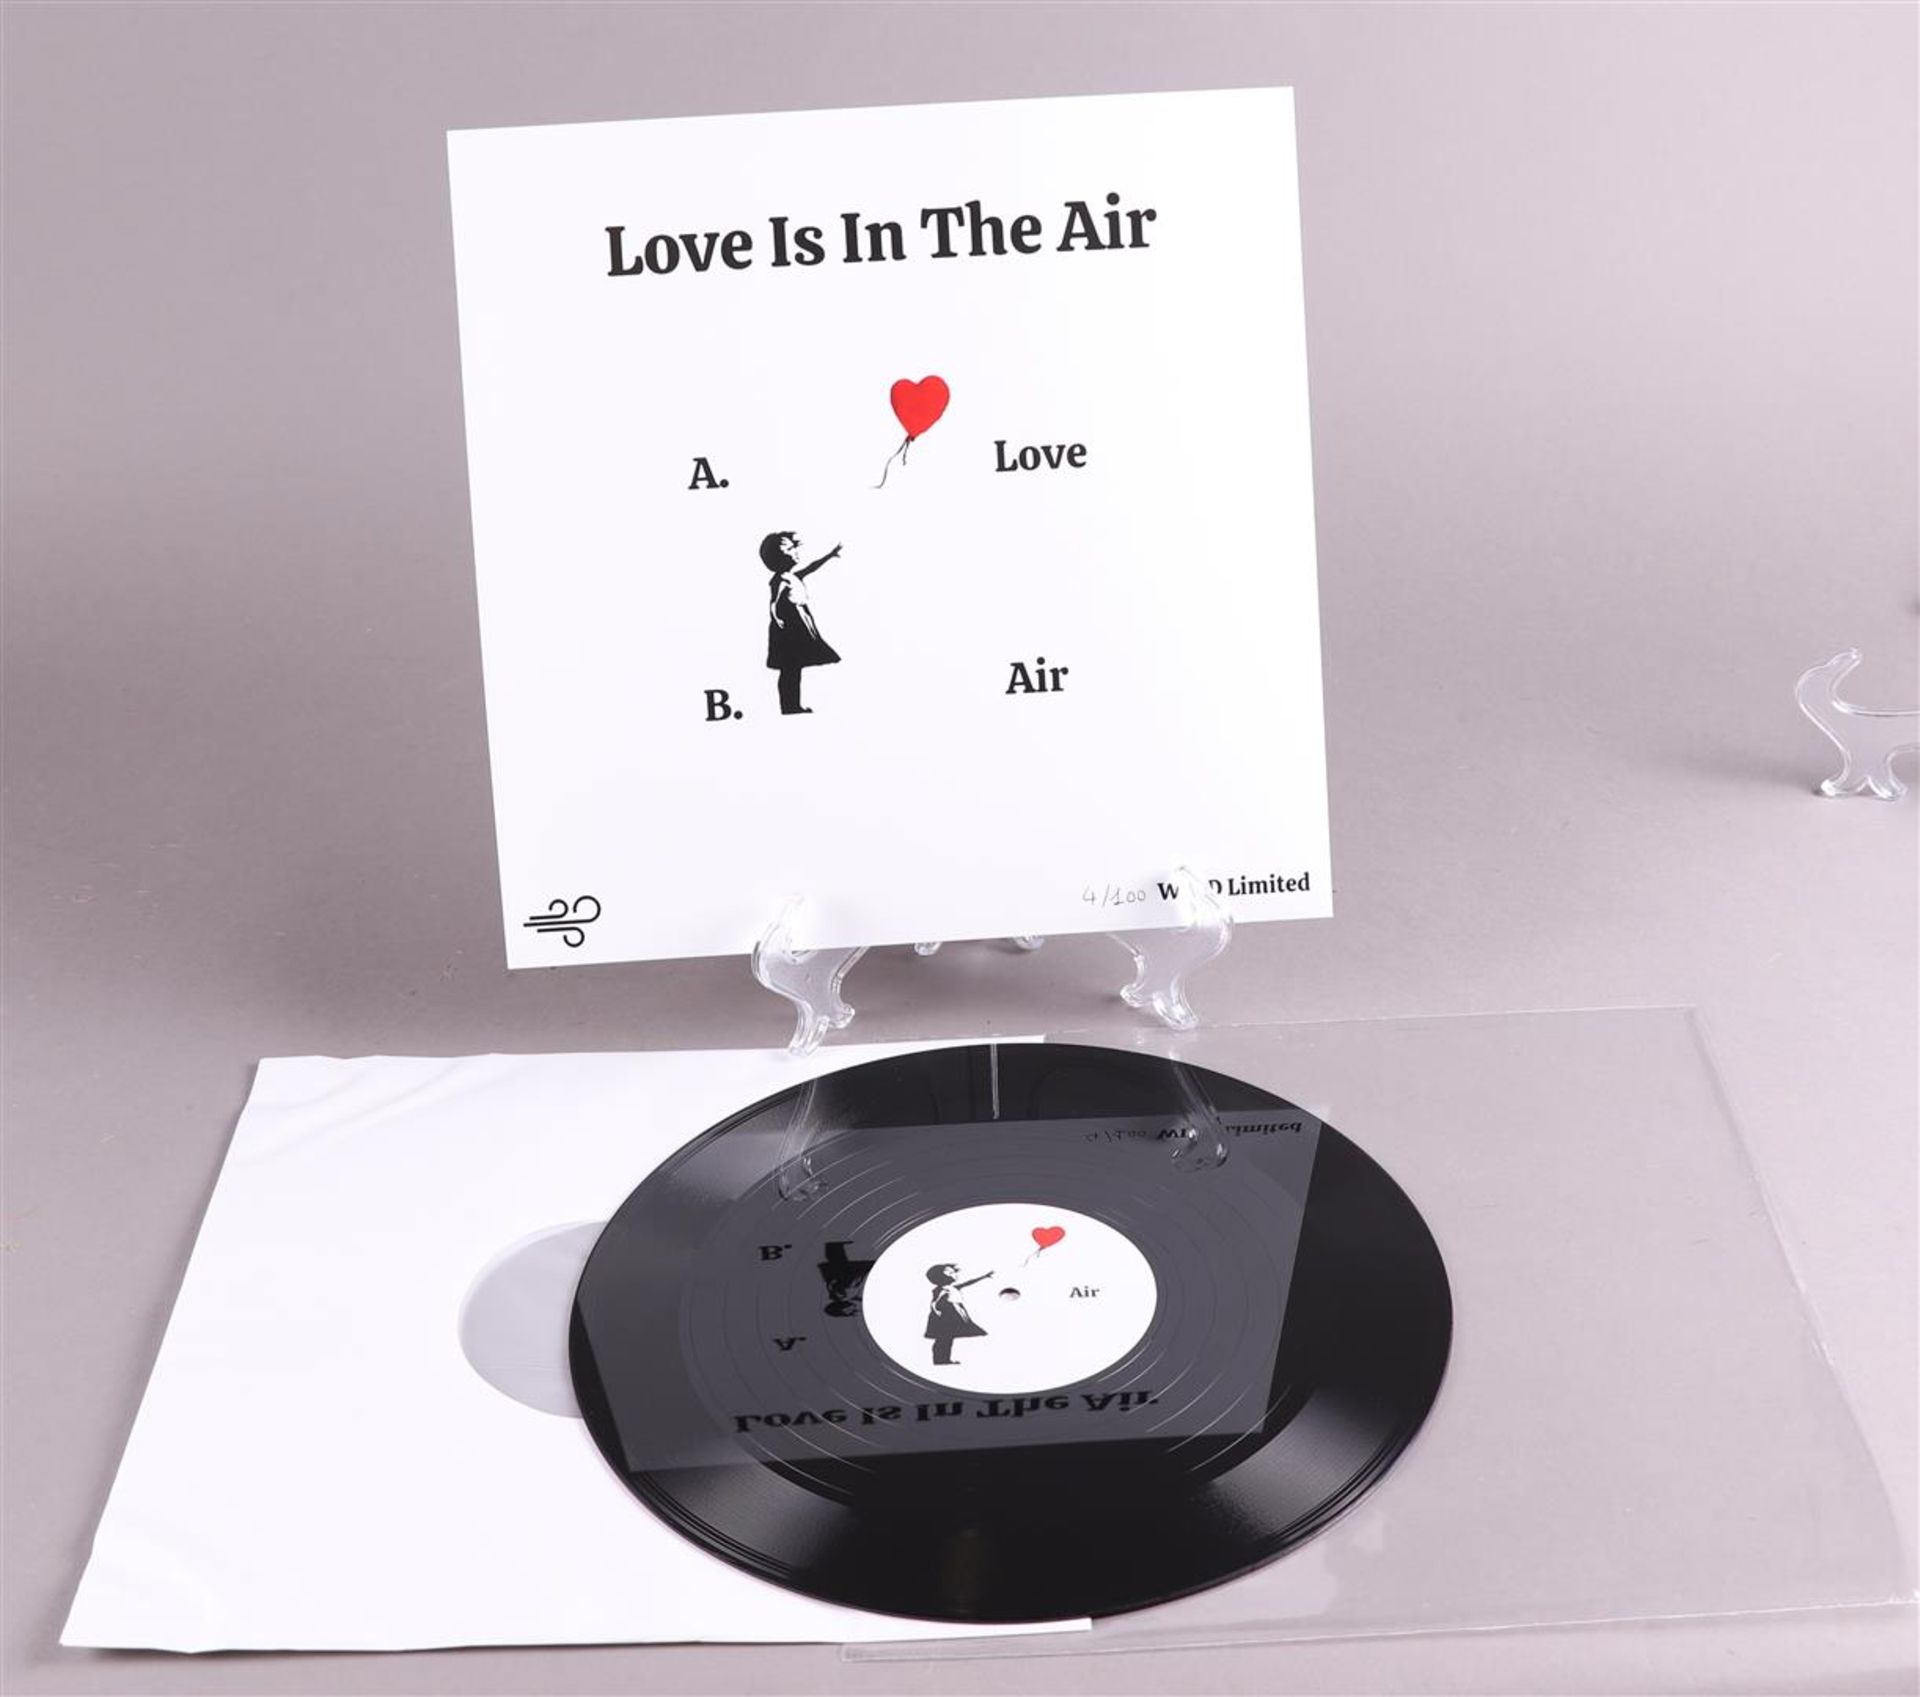 Banksy (b.: 1974), (after), Love is in the Air, Vinyl E.P. in cover. numbered 4/100. Wind limited.